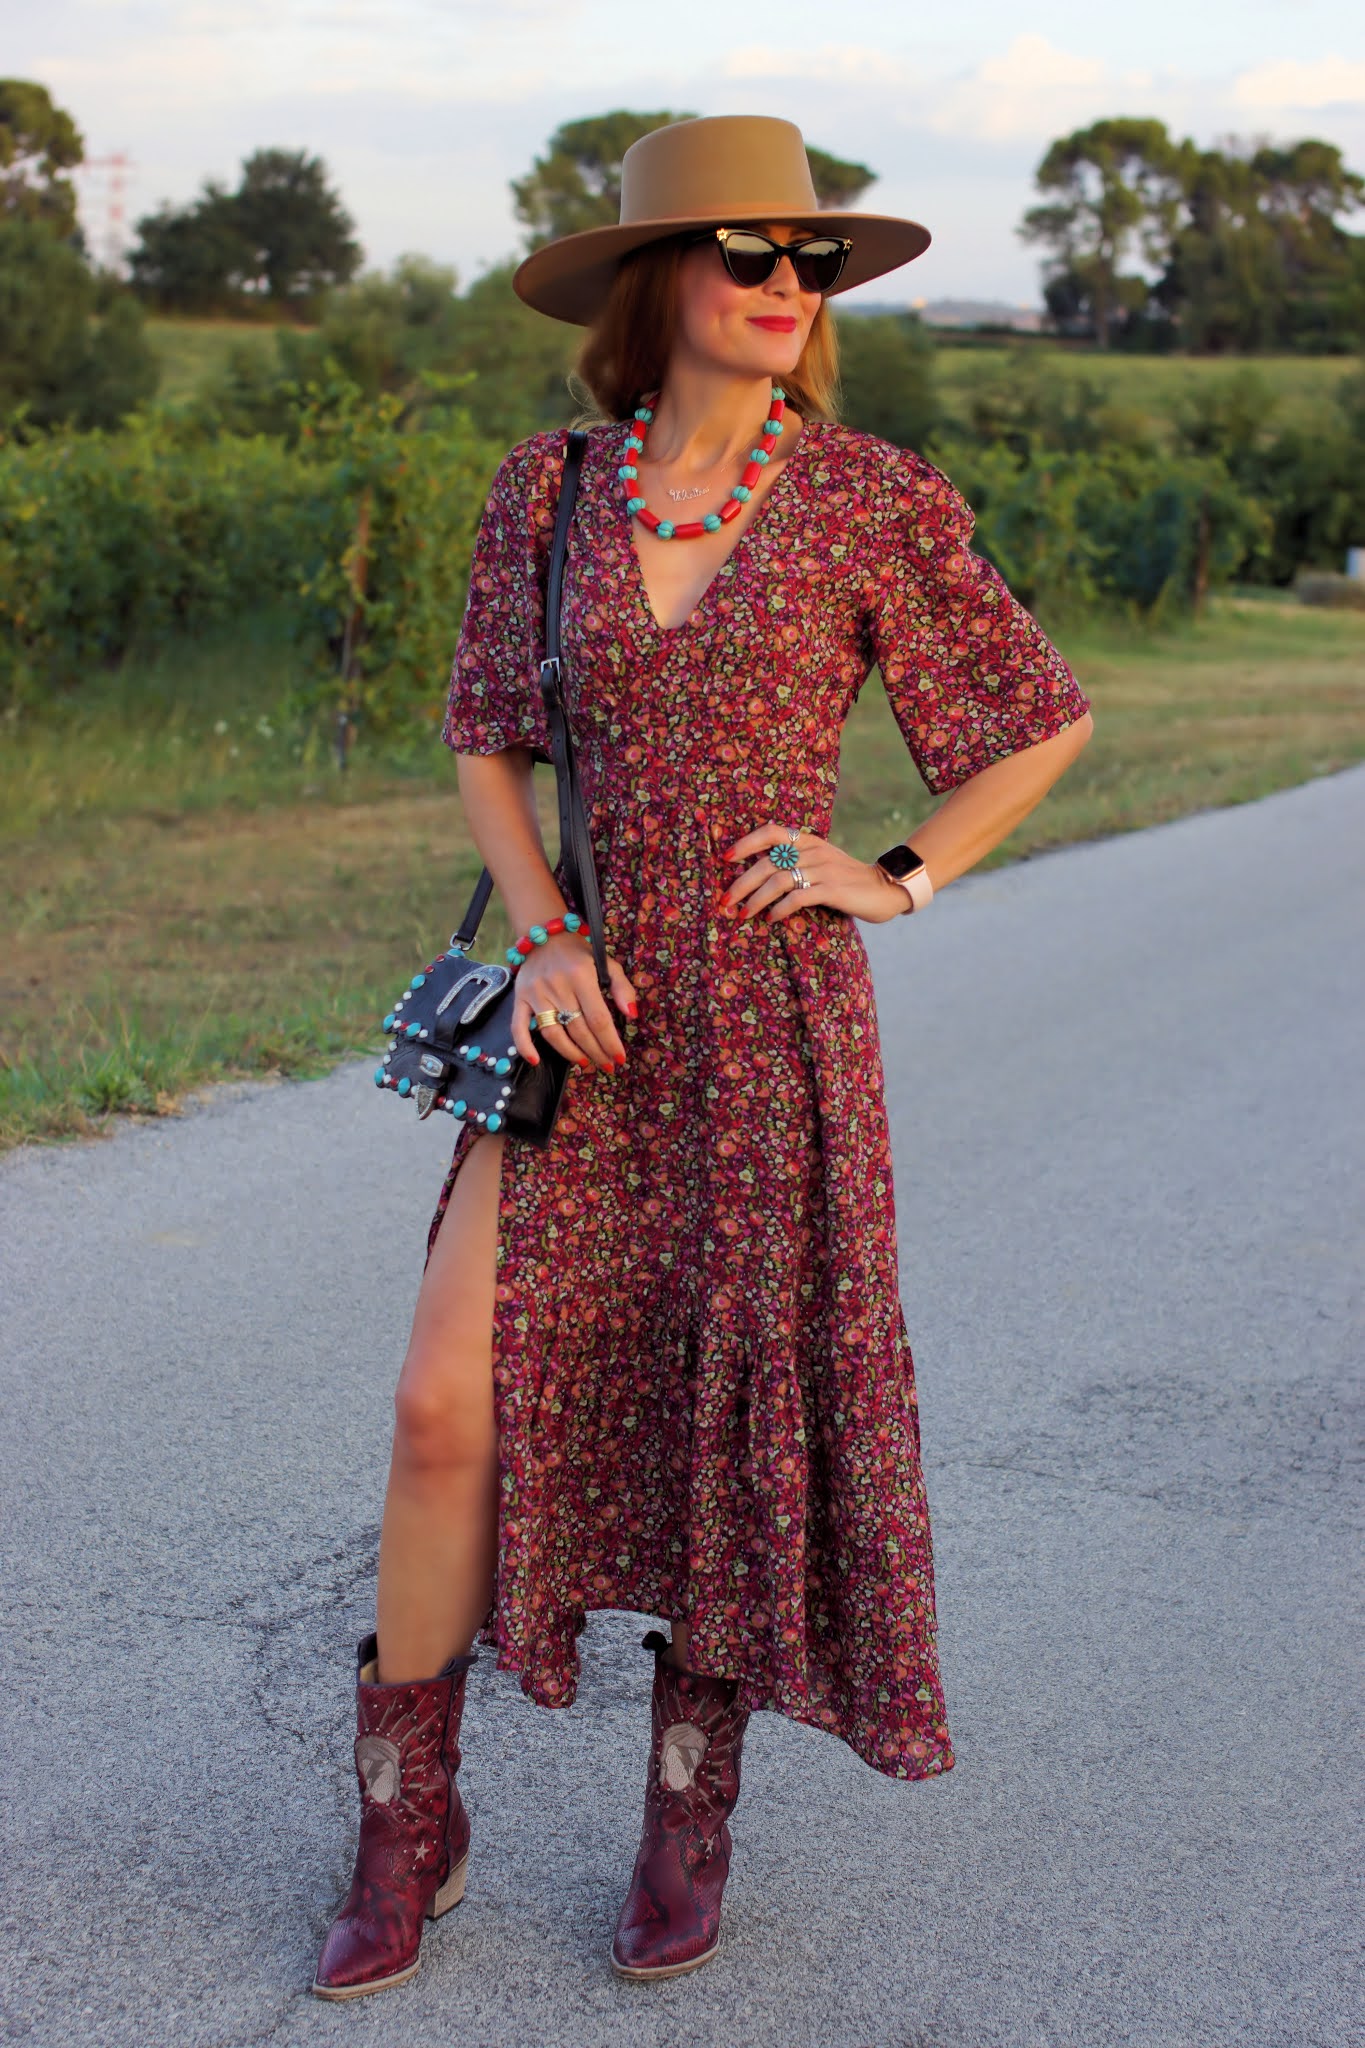 A transitional western style outfit with a ba&sh Paris dress and Lack of Color hat